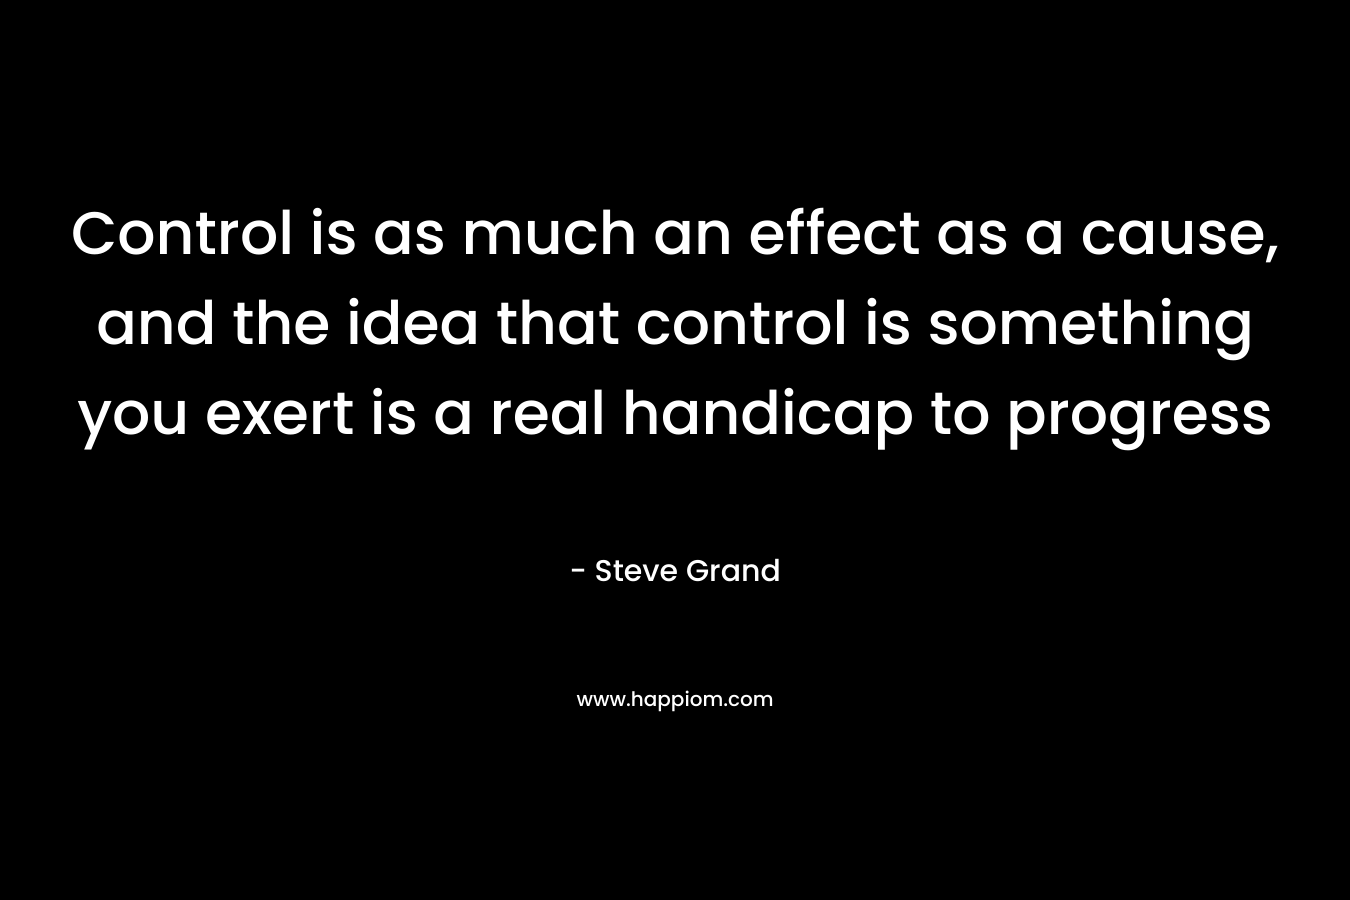 Control is as much an effect as a cause, and the idea that control is something you exert is a real handicap to progress